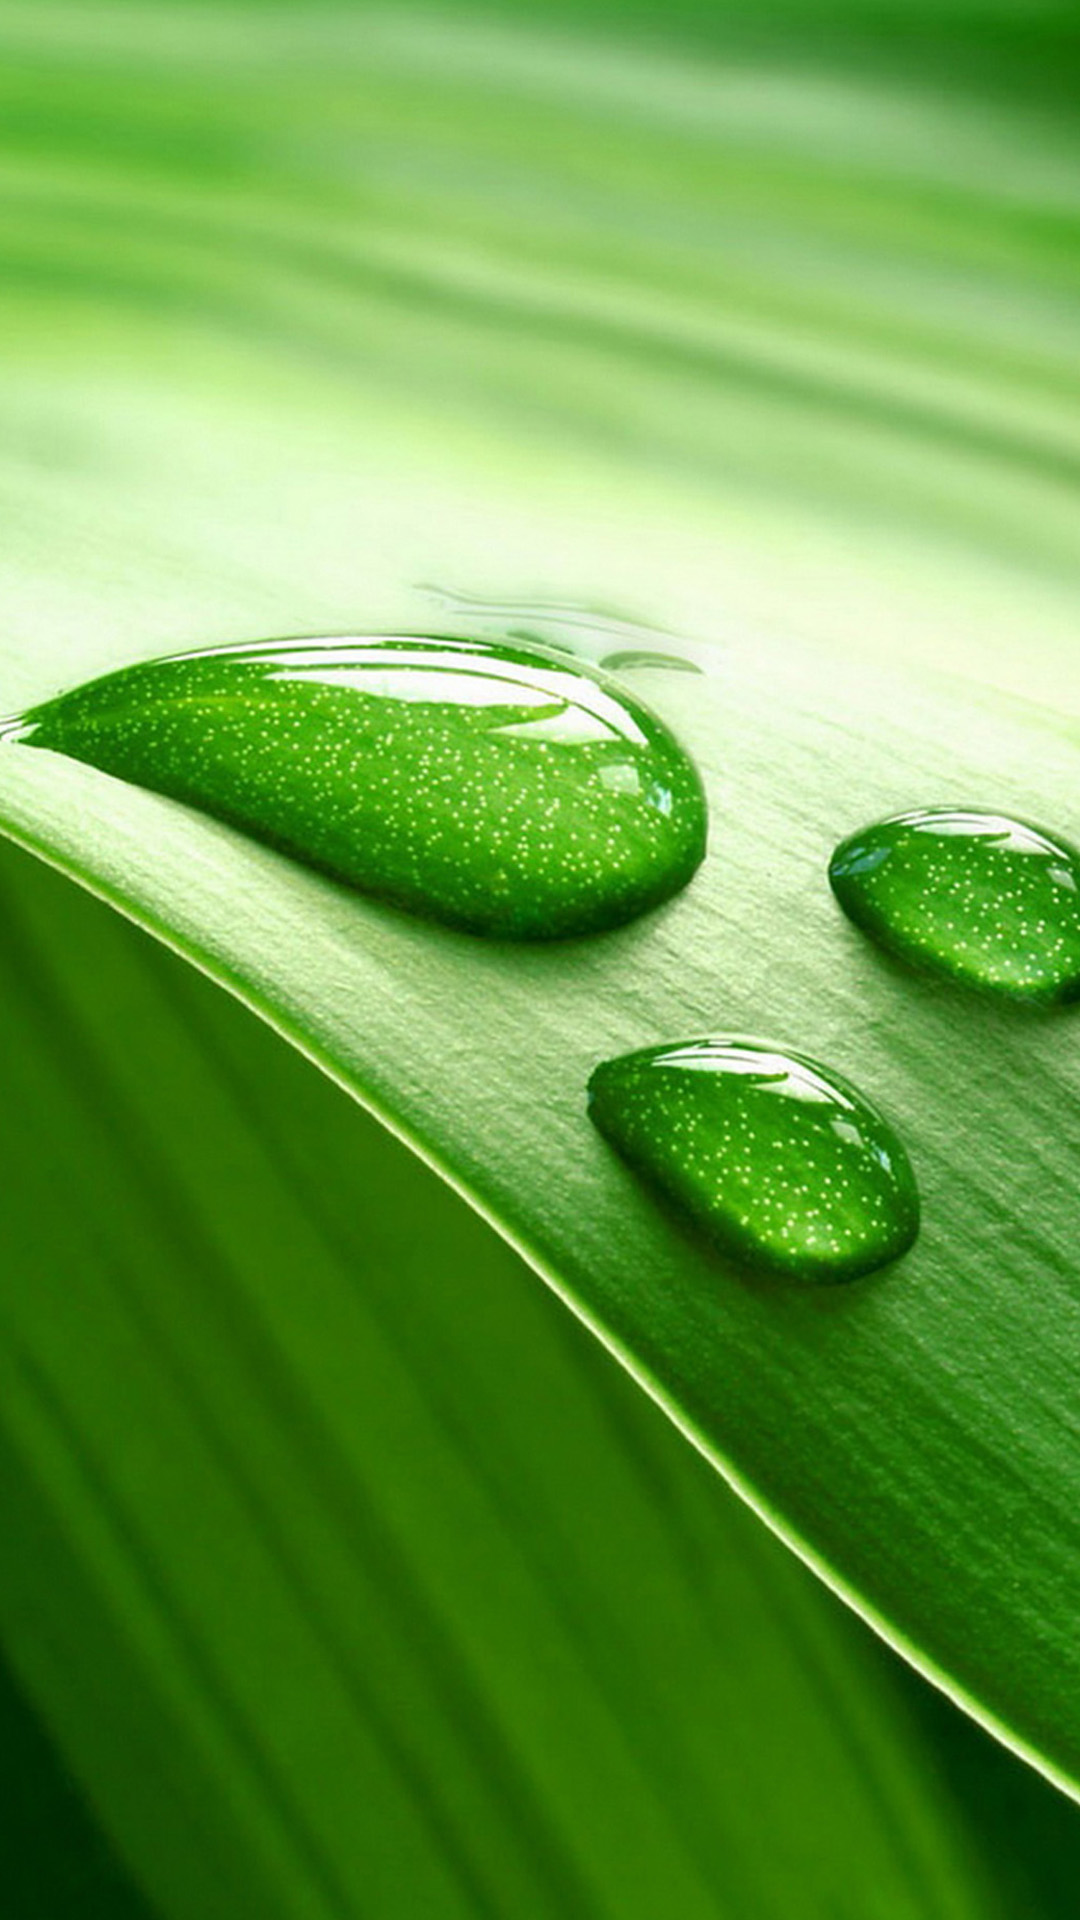 Samsung mobile Wallpaper - Green Leaf And Water Drop - 1080x1920 Wallpaper  